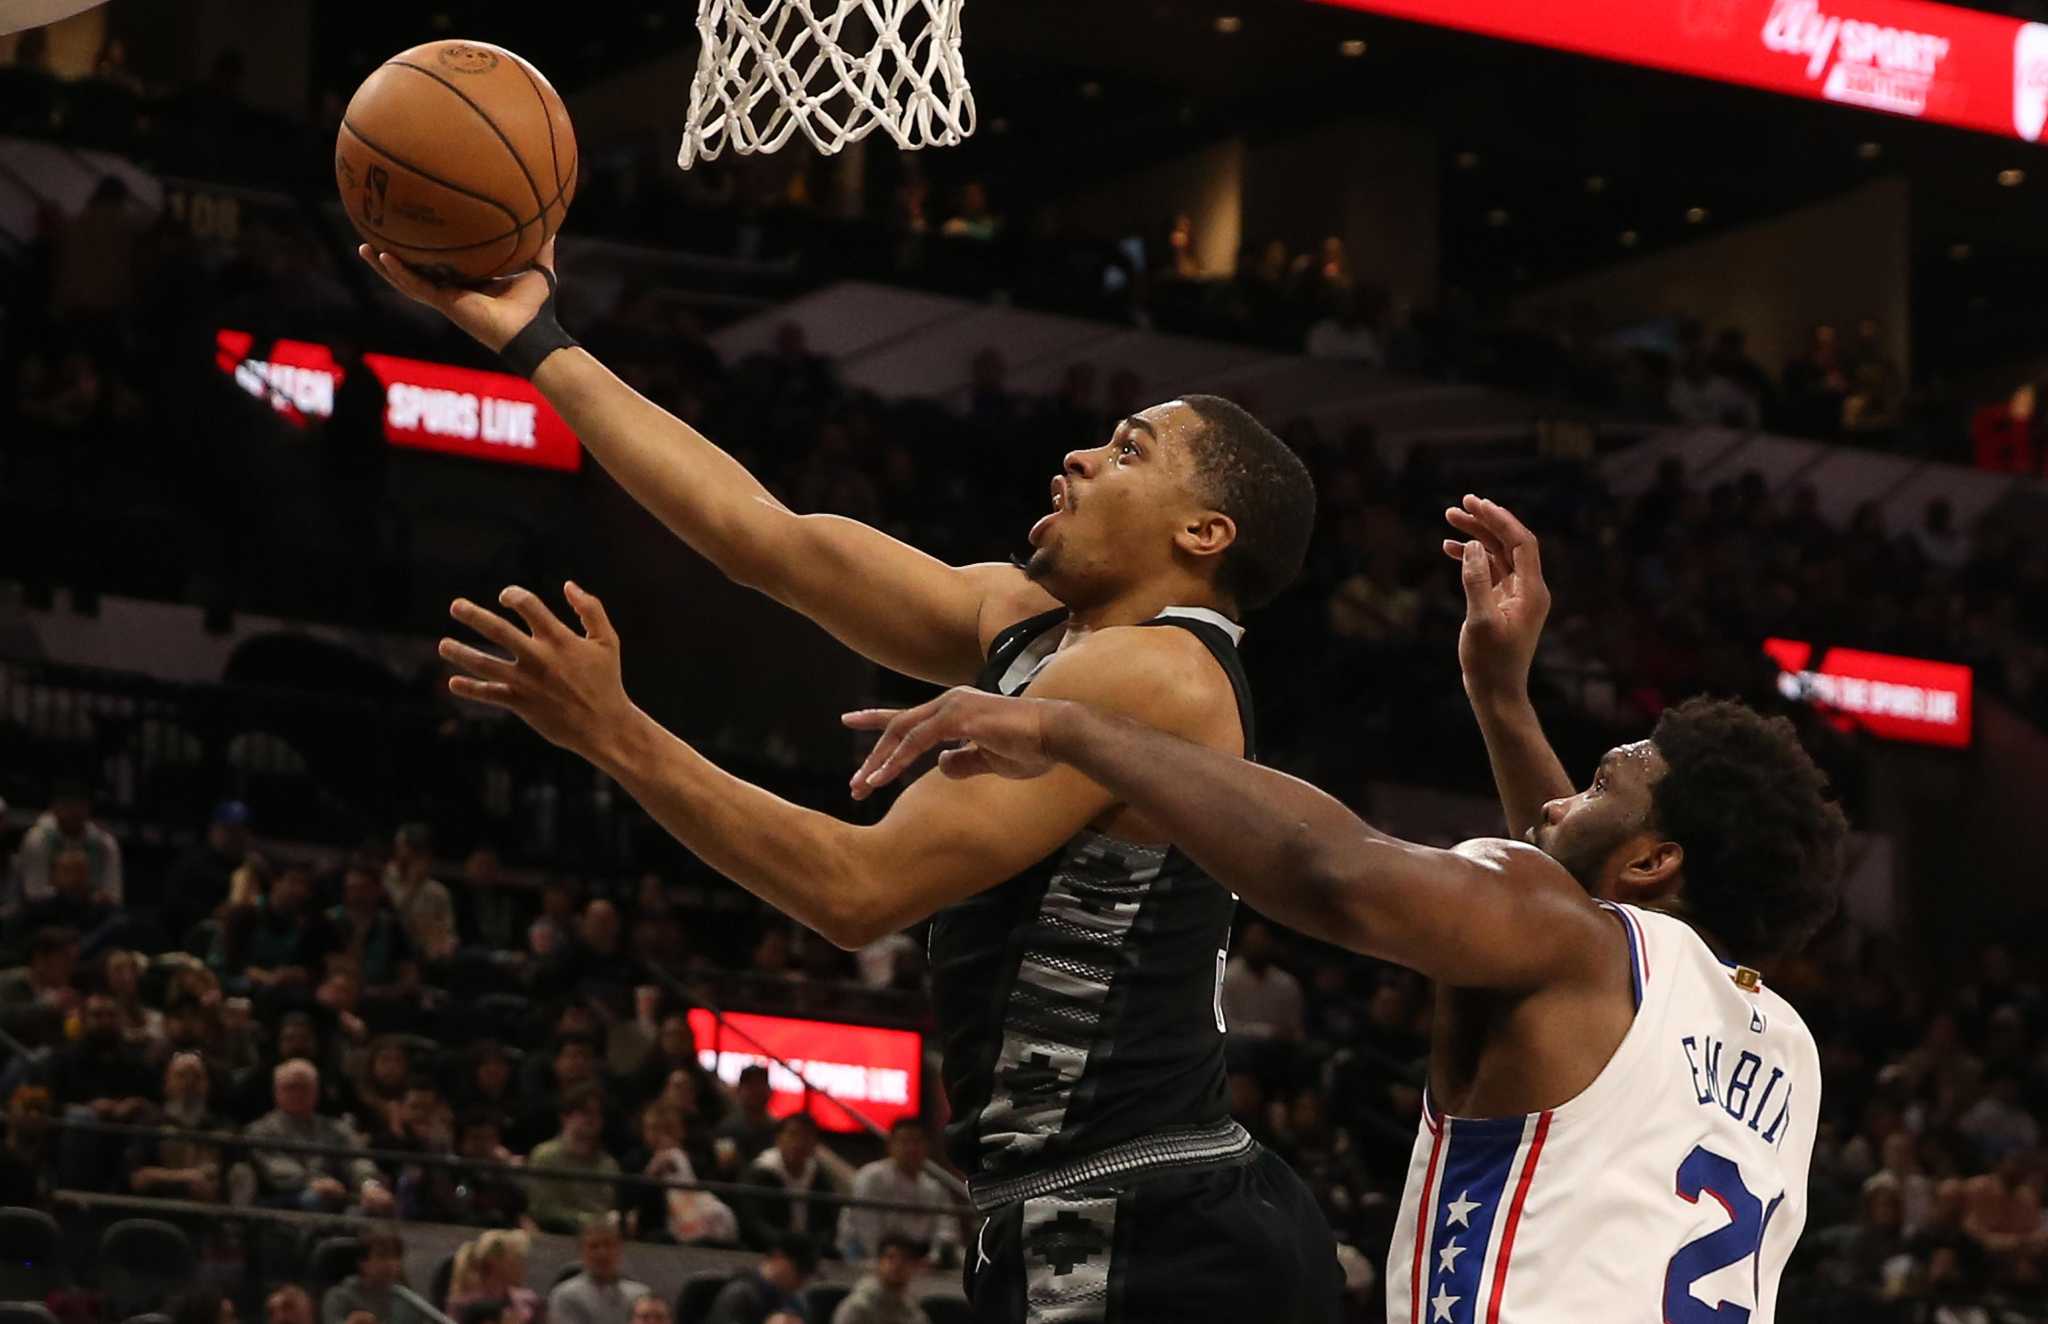 Spurs vs. 76ers: How to watch the game, notable stats, player news